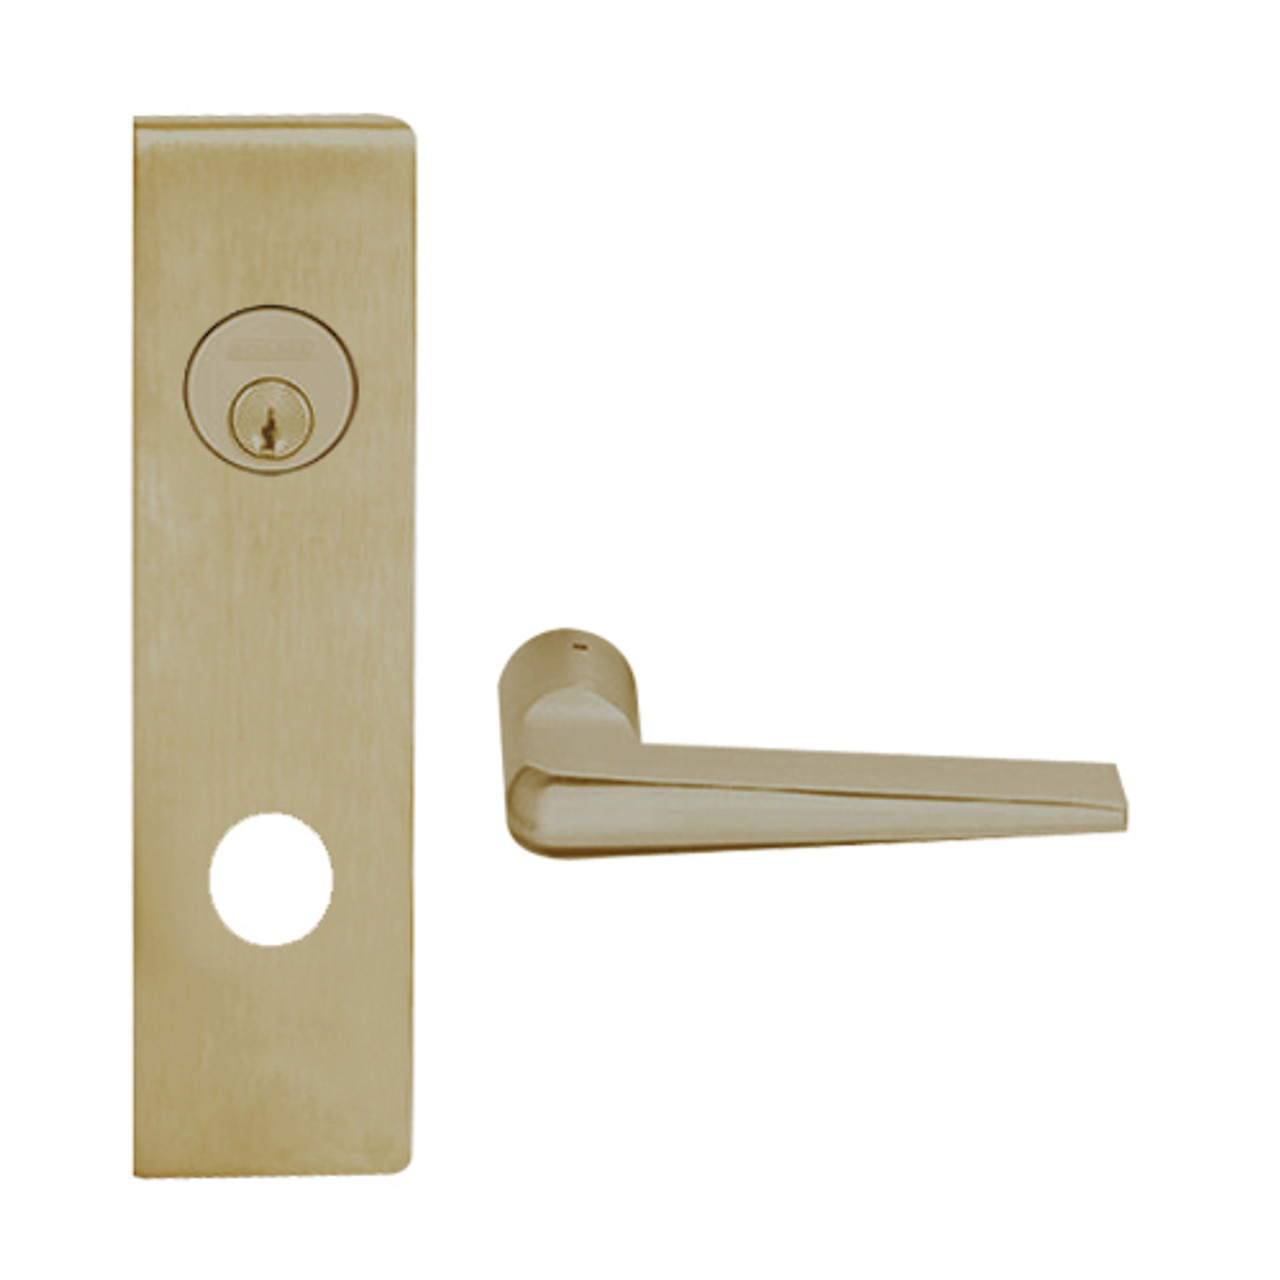 L9070L-05N-613 Schlage L Series Less Cylinder Classroom Commercial Mortise Lock with 05 Cast Lever Design in Oil Rubbed Bronze